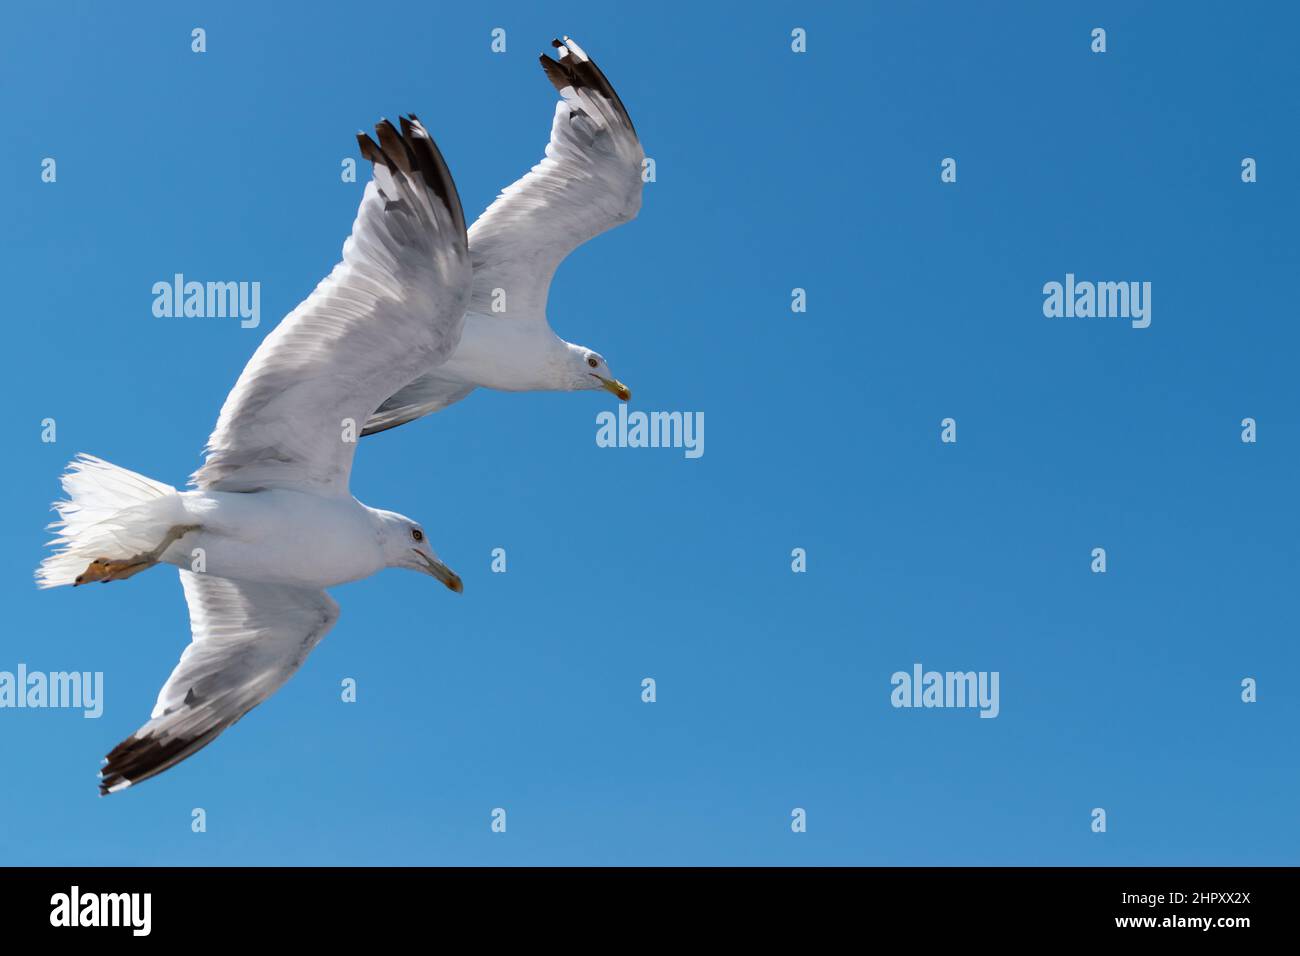 Two seabirds Seagulls in flight against the blue sky Stock Photo